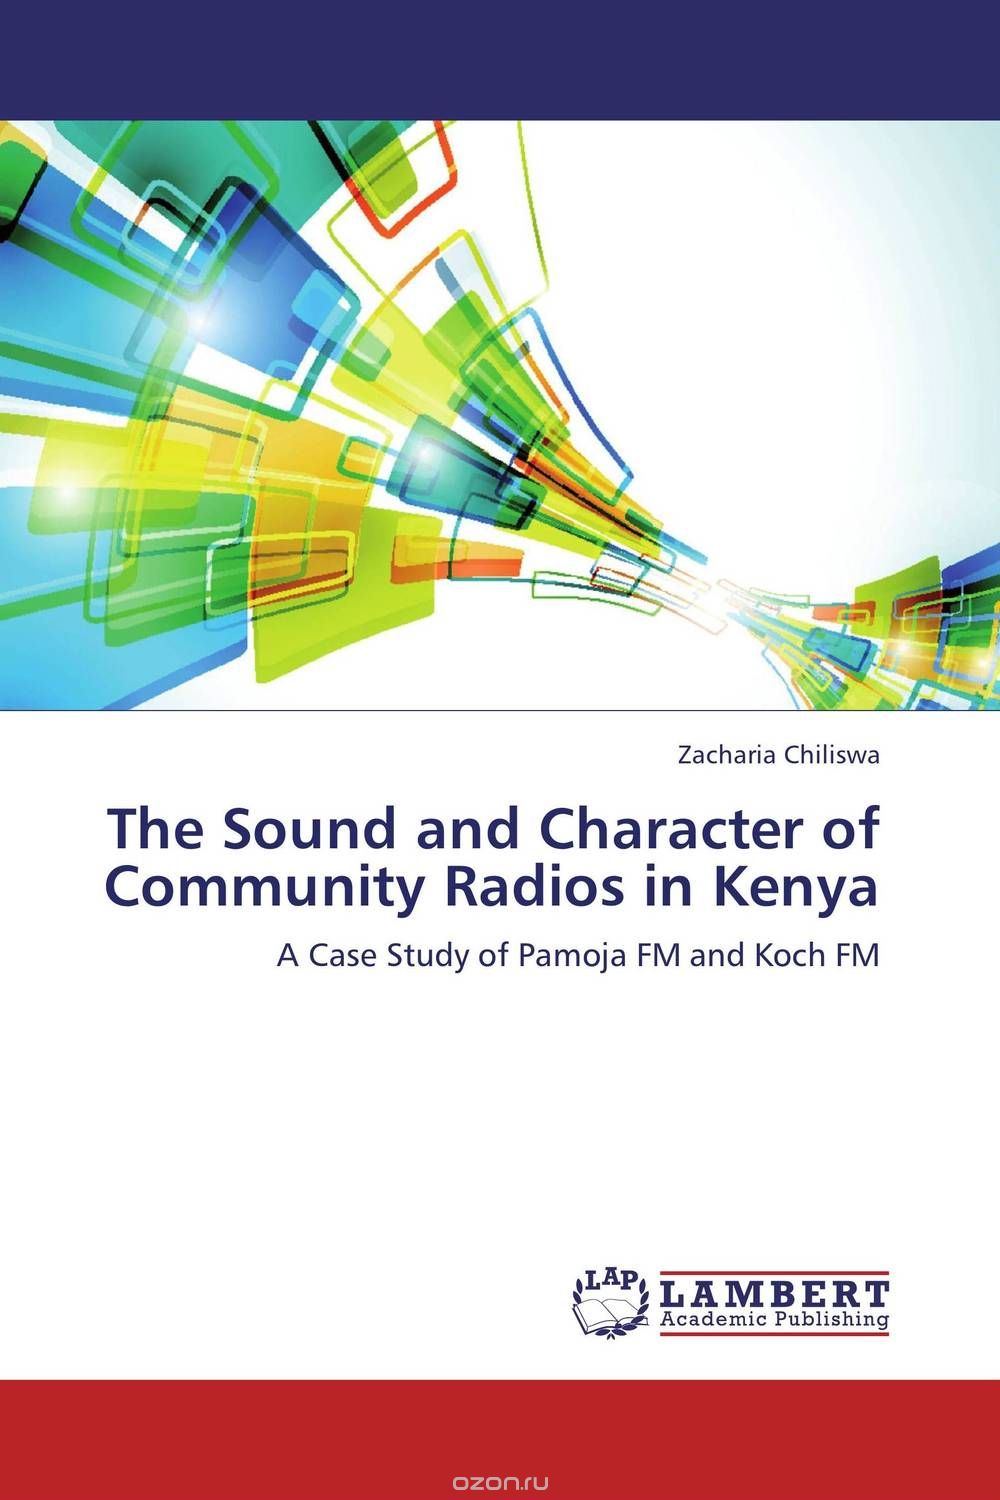 The Sound and Character of Community Radios in Kenya